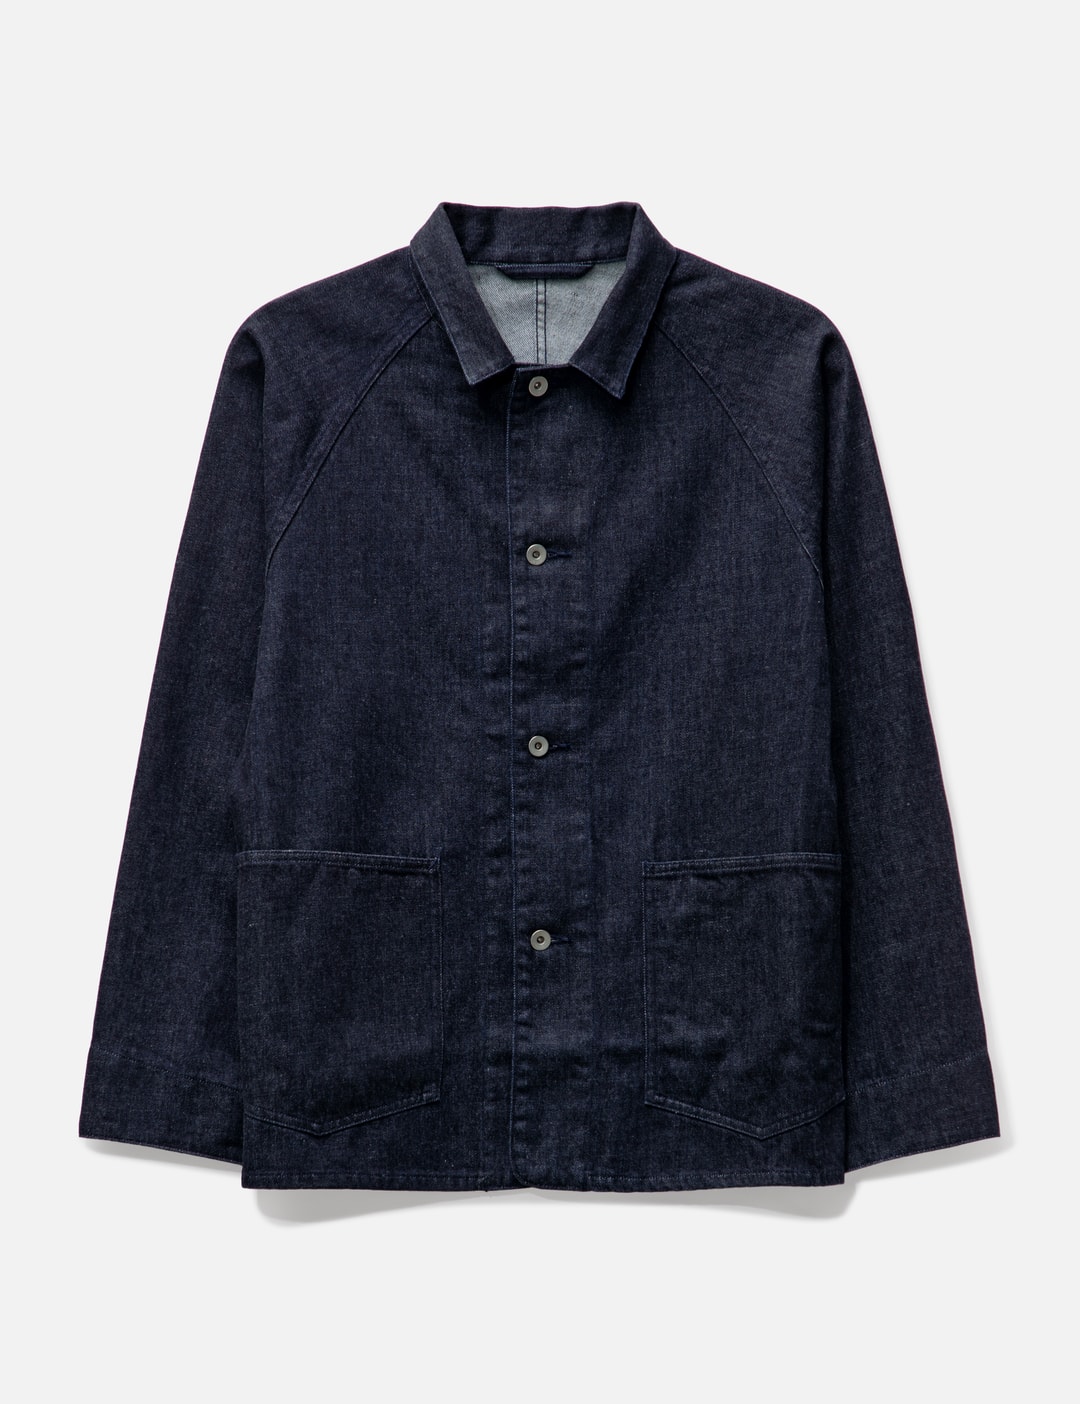 Nanamica - Denim Jacket | HBX - Globally Curated Fashion and Lifestyle ...